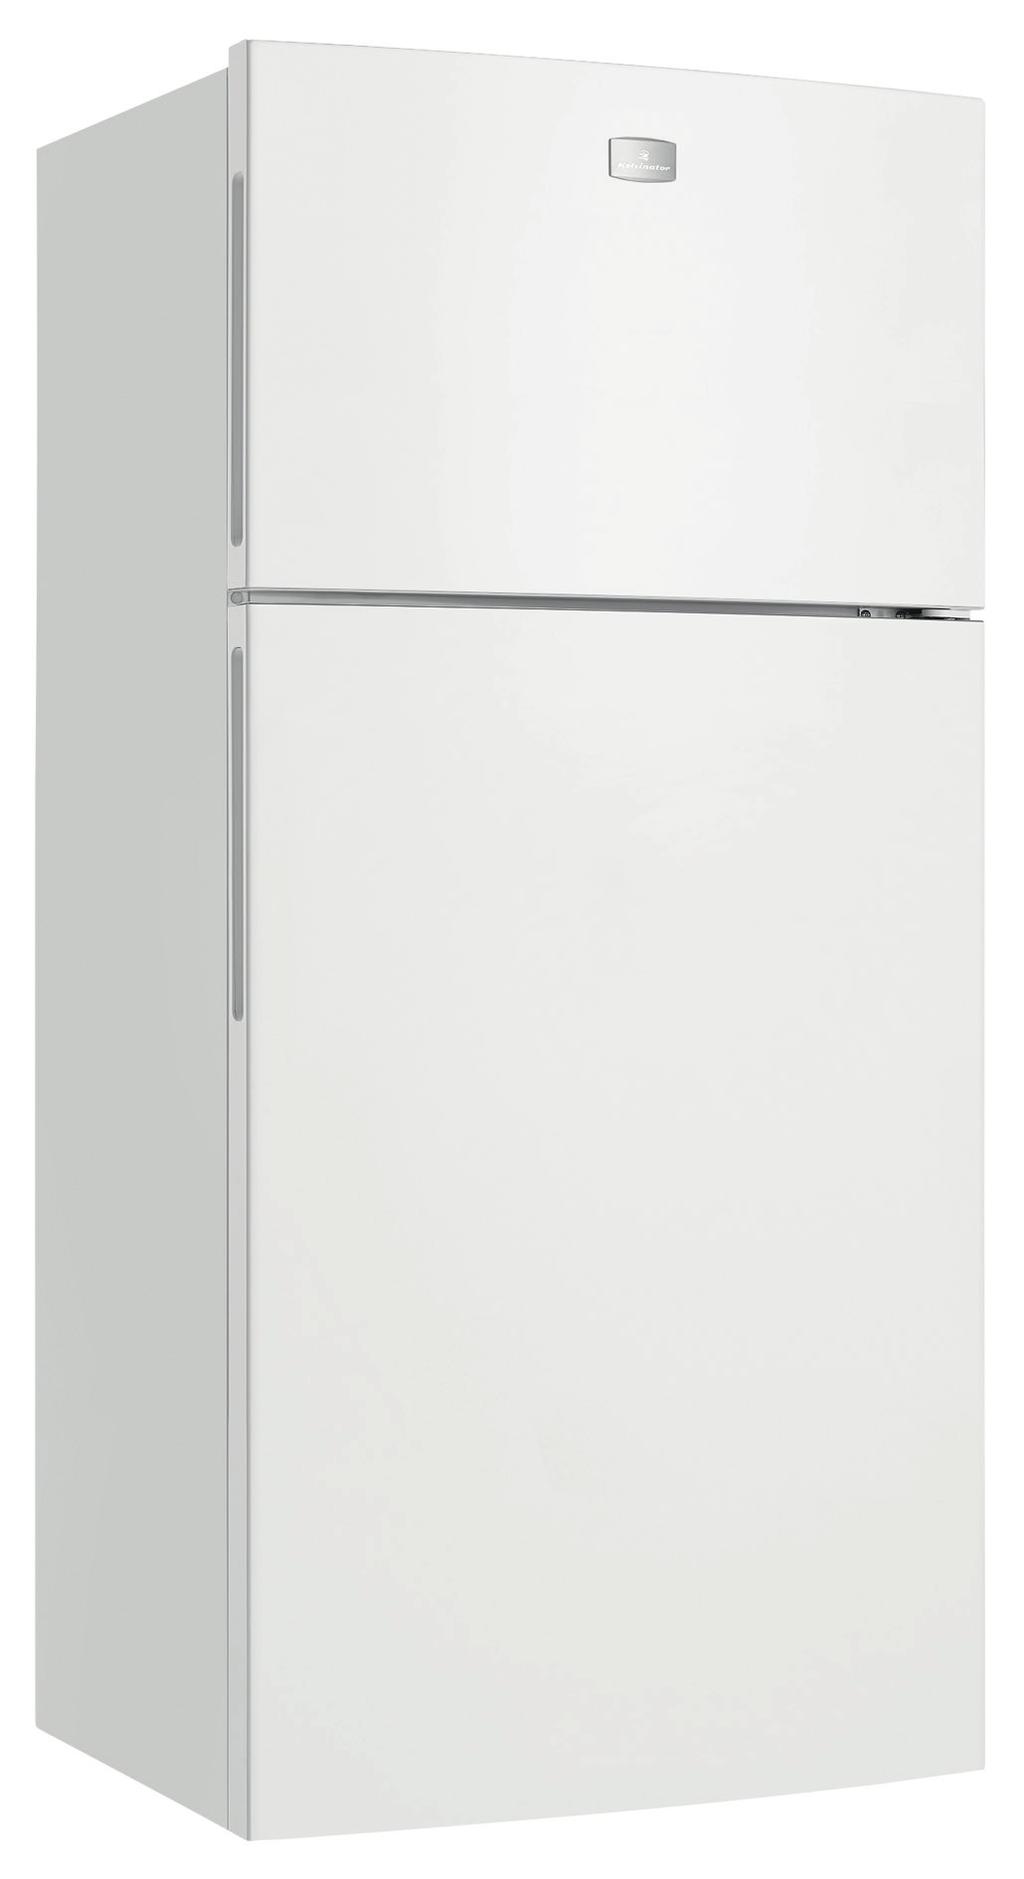 Australians love a Kelvinator For over 90 years, Kelvinator has been delivering reliability and performance to Australian families. It s a brand Aussies trust to get the job done well.